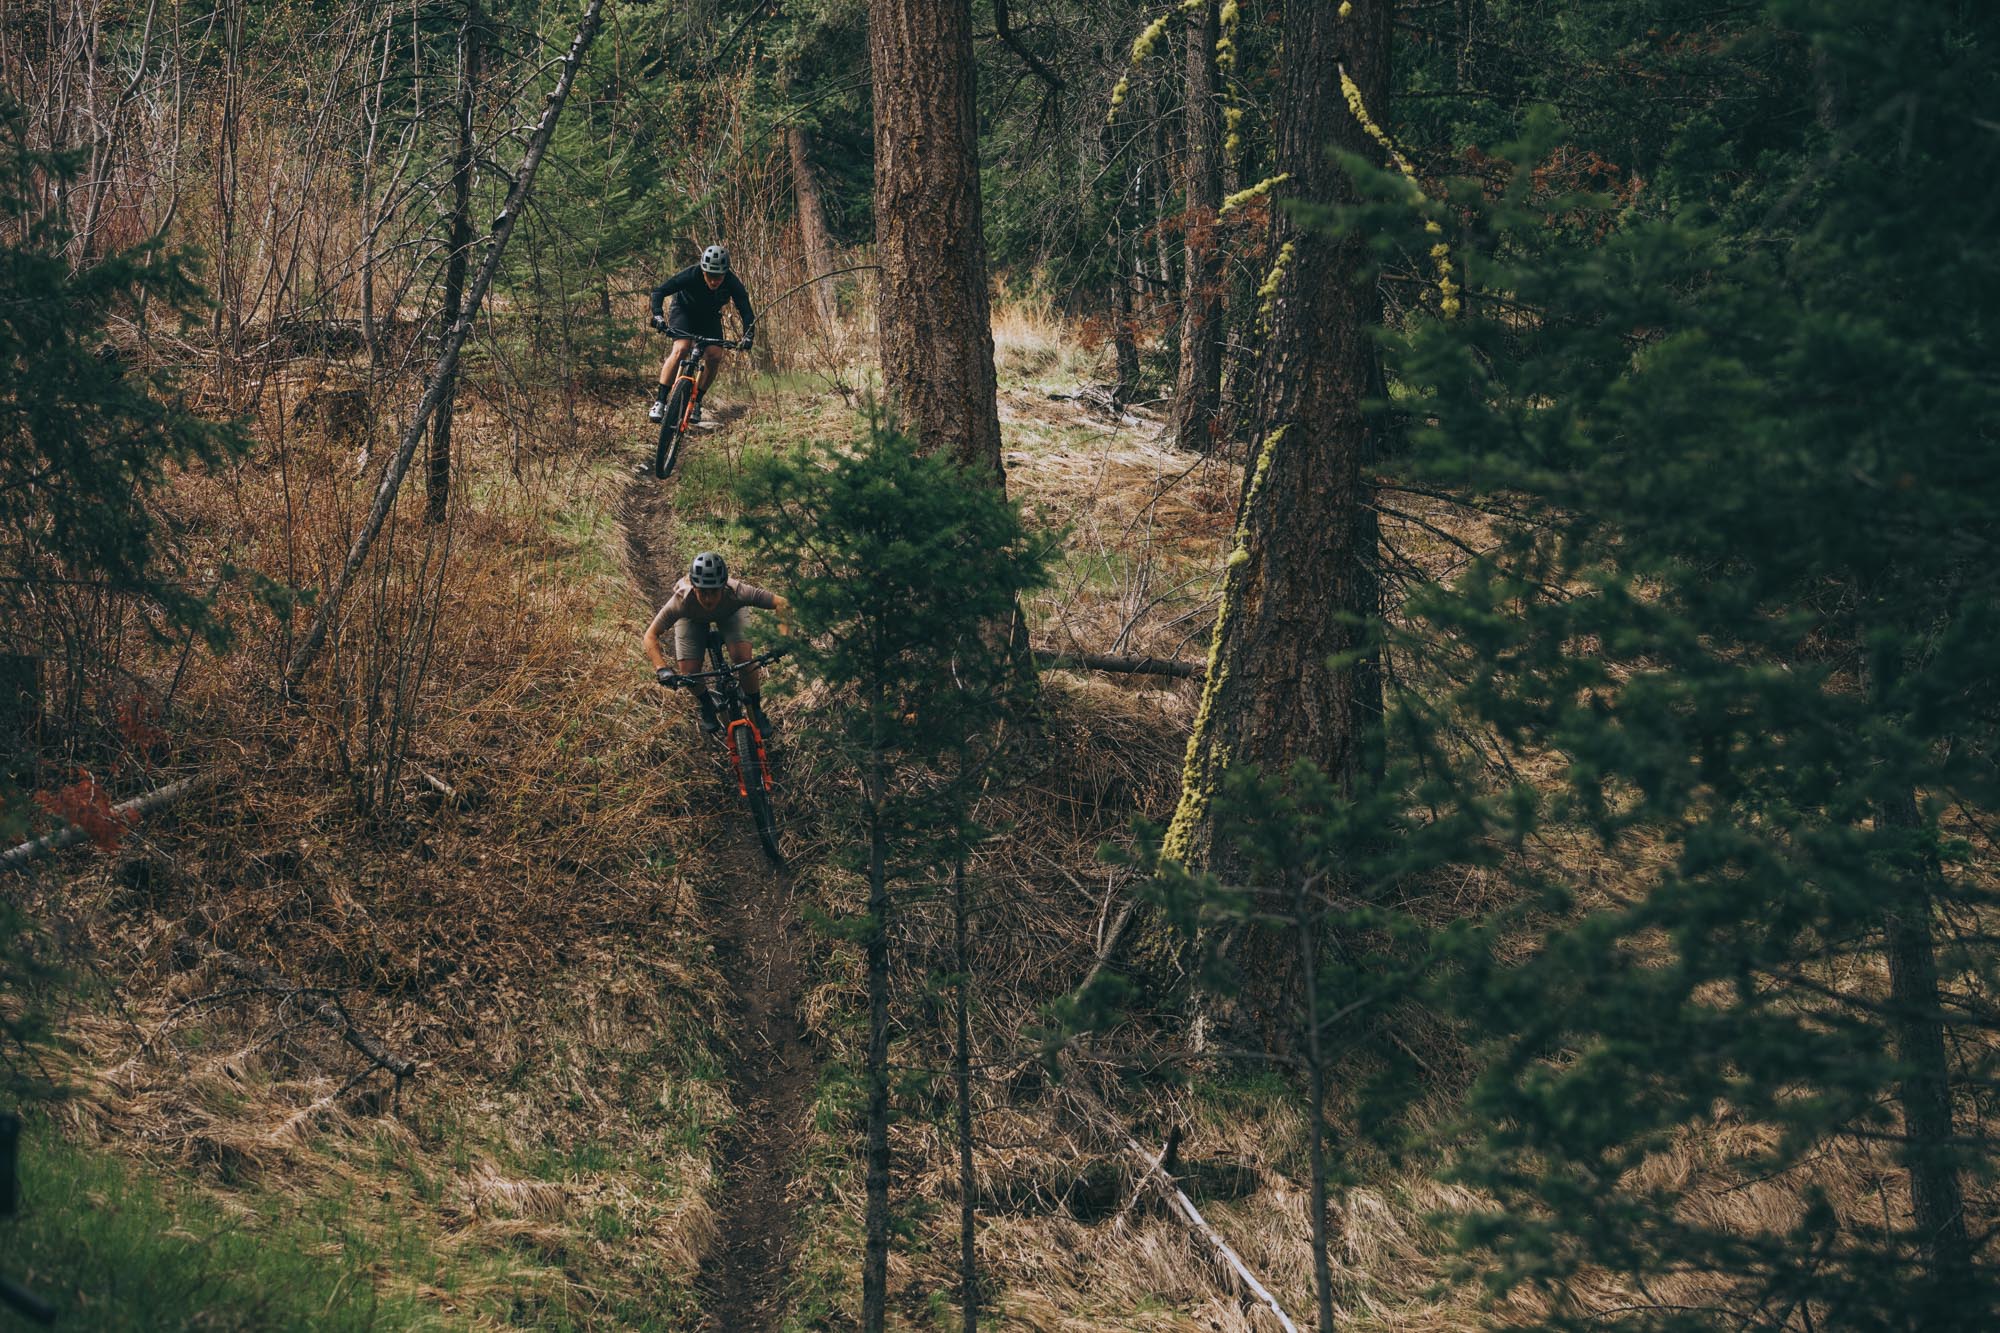 Andreane Lanthier Nadeau and Remi Gauvin ride the Element in British Columbia, Canada